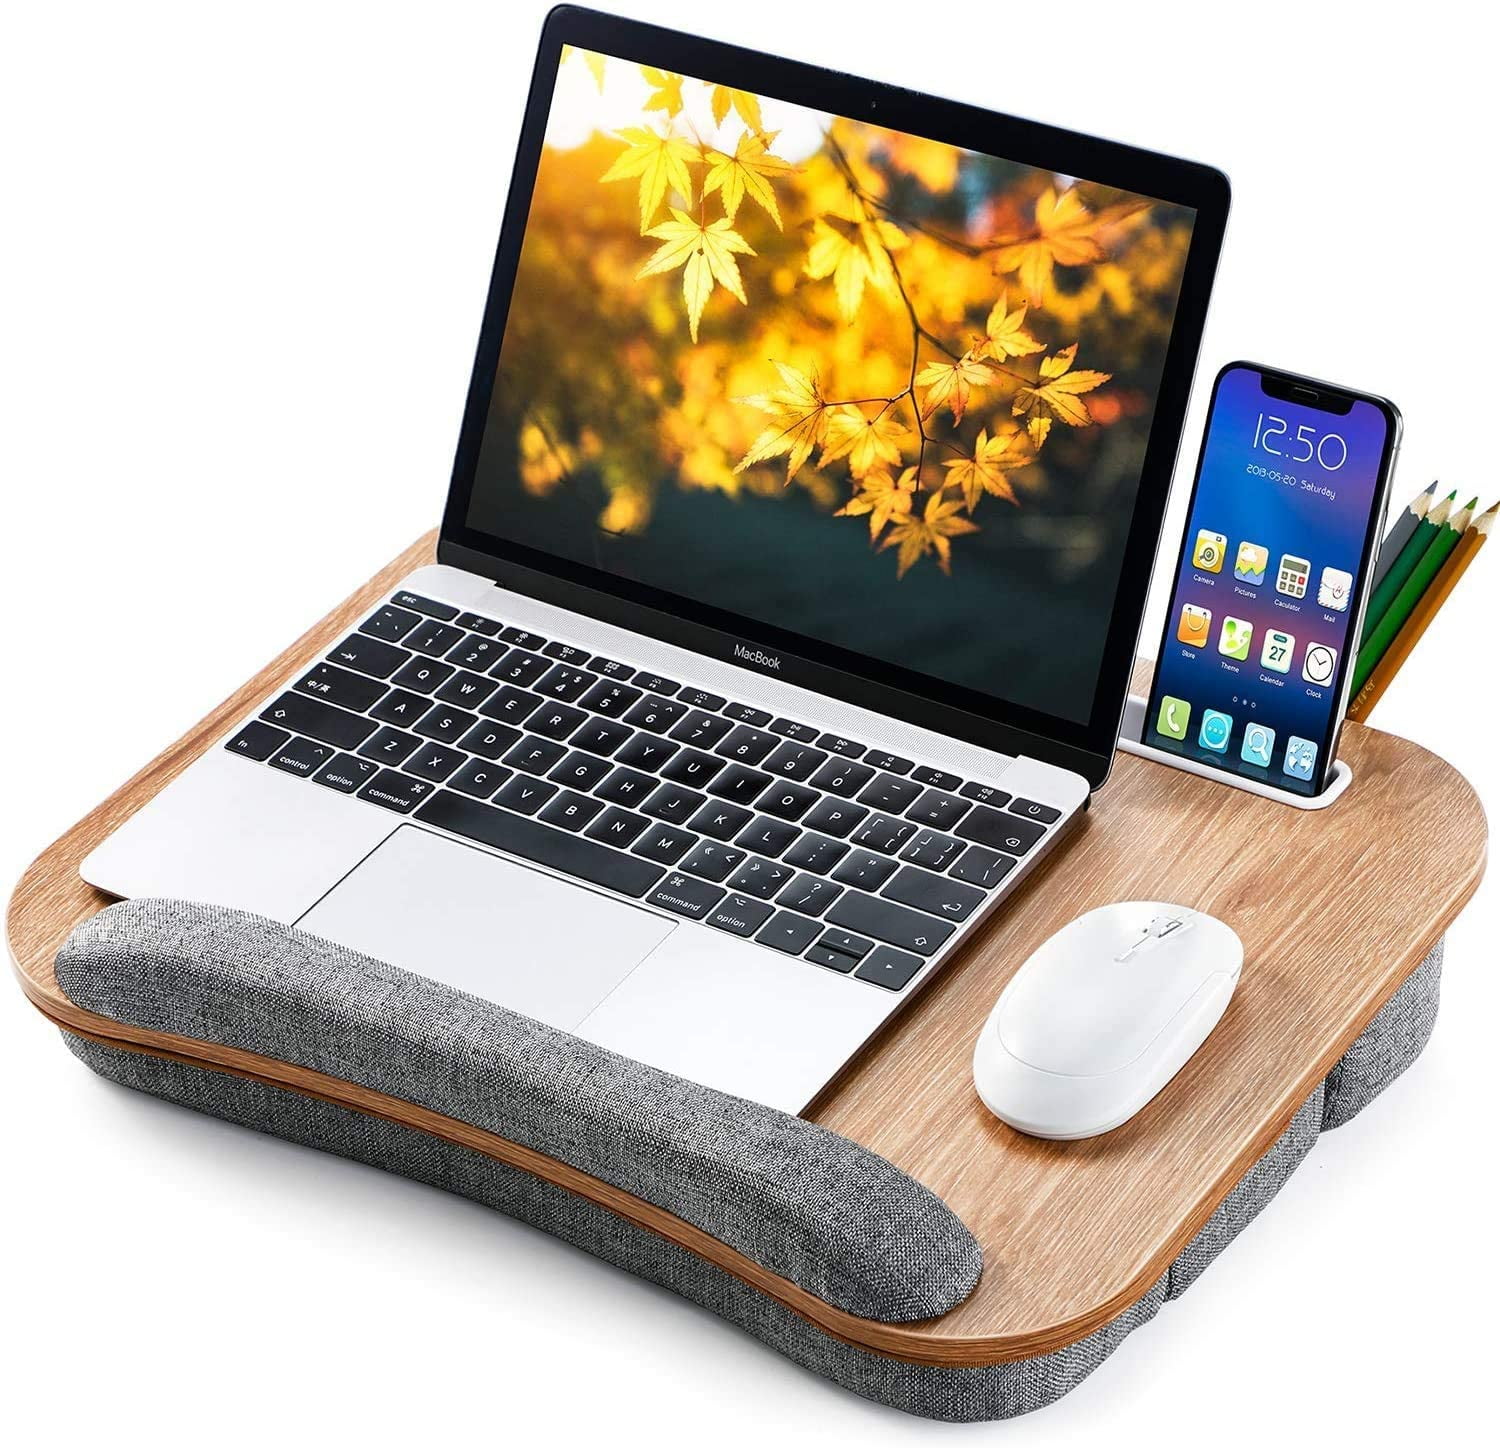 Built-in Mouse Pad Tablet and Phone Holder Slots Drawing for Working Computer Lap Desk with Detachable Wrist Rest Cushion Writing Levovo Oversized Lap Desk Supports to 17'' Laptop